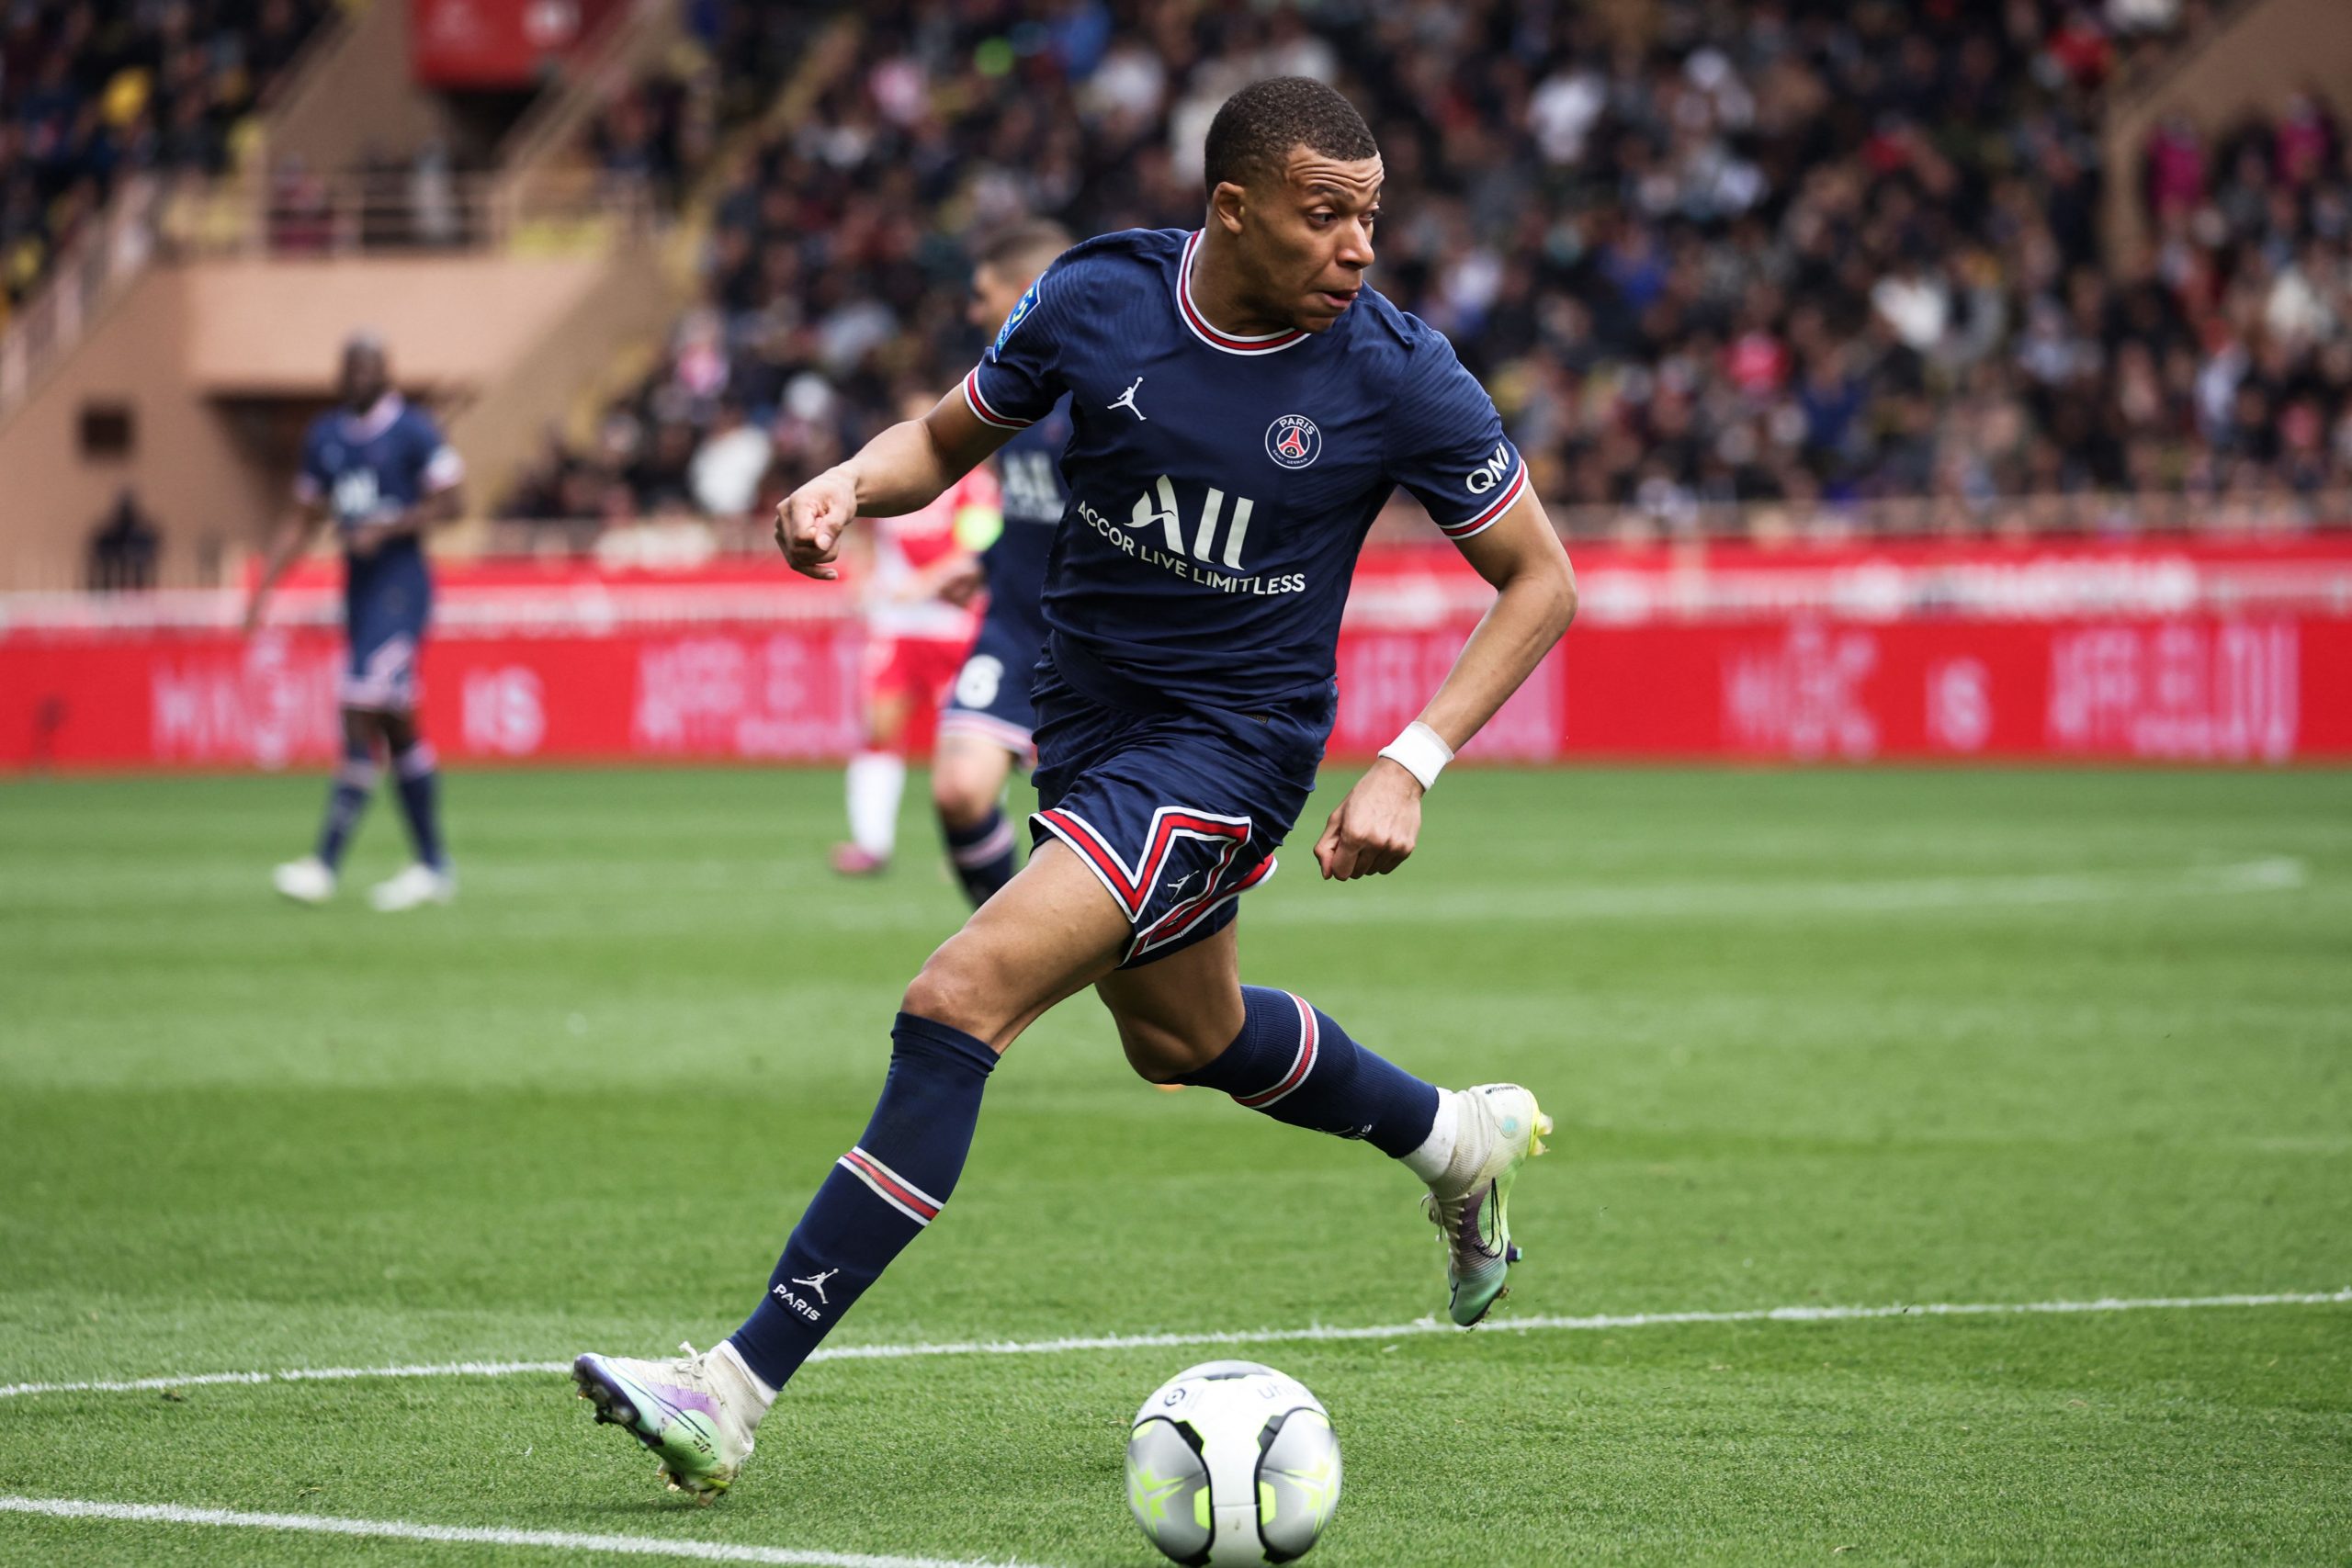 Paris Saint-Germain's French forward Kylian Mbappe runs with the ball during the French L1 football match between AS Monaco and Paris Saint Germain (PSG) at the Louis II Stadium (Stade Louis II) in the Principality of Monaco on March 20, 2022. (Photo by Valery HACHE / AFP) (Photo by VALERY HACHE/AFP via Getty Images) The 4th Official uses images provided by the following image agency: Getty Images (https://www.gettyimages.de/) and Imago Images (https://www.imago-images.de/)